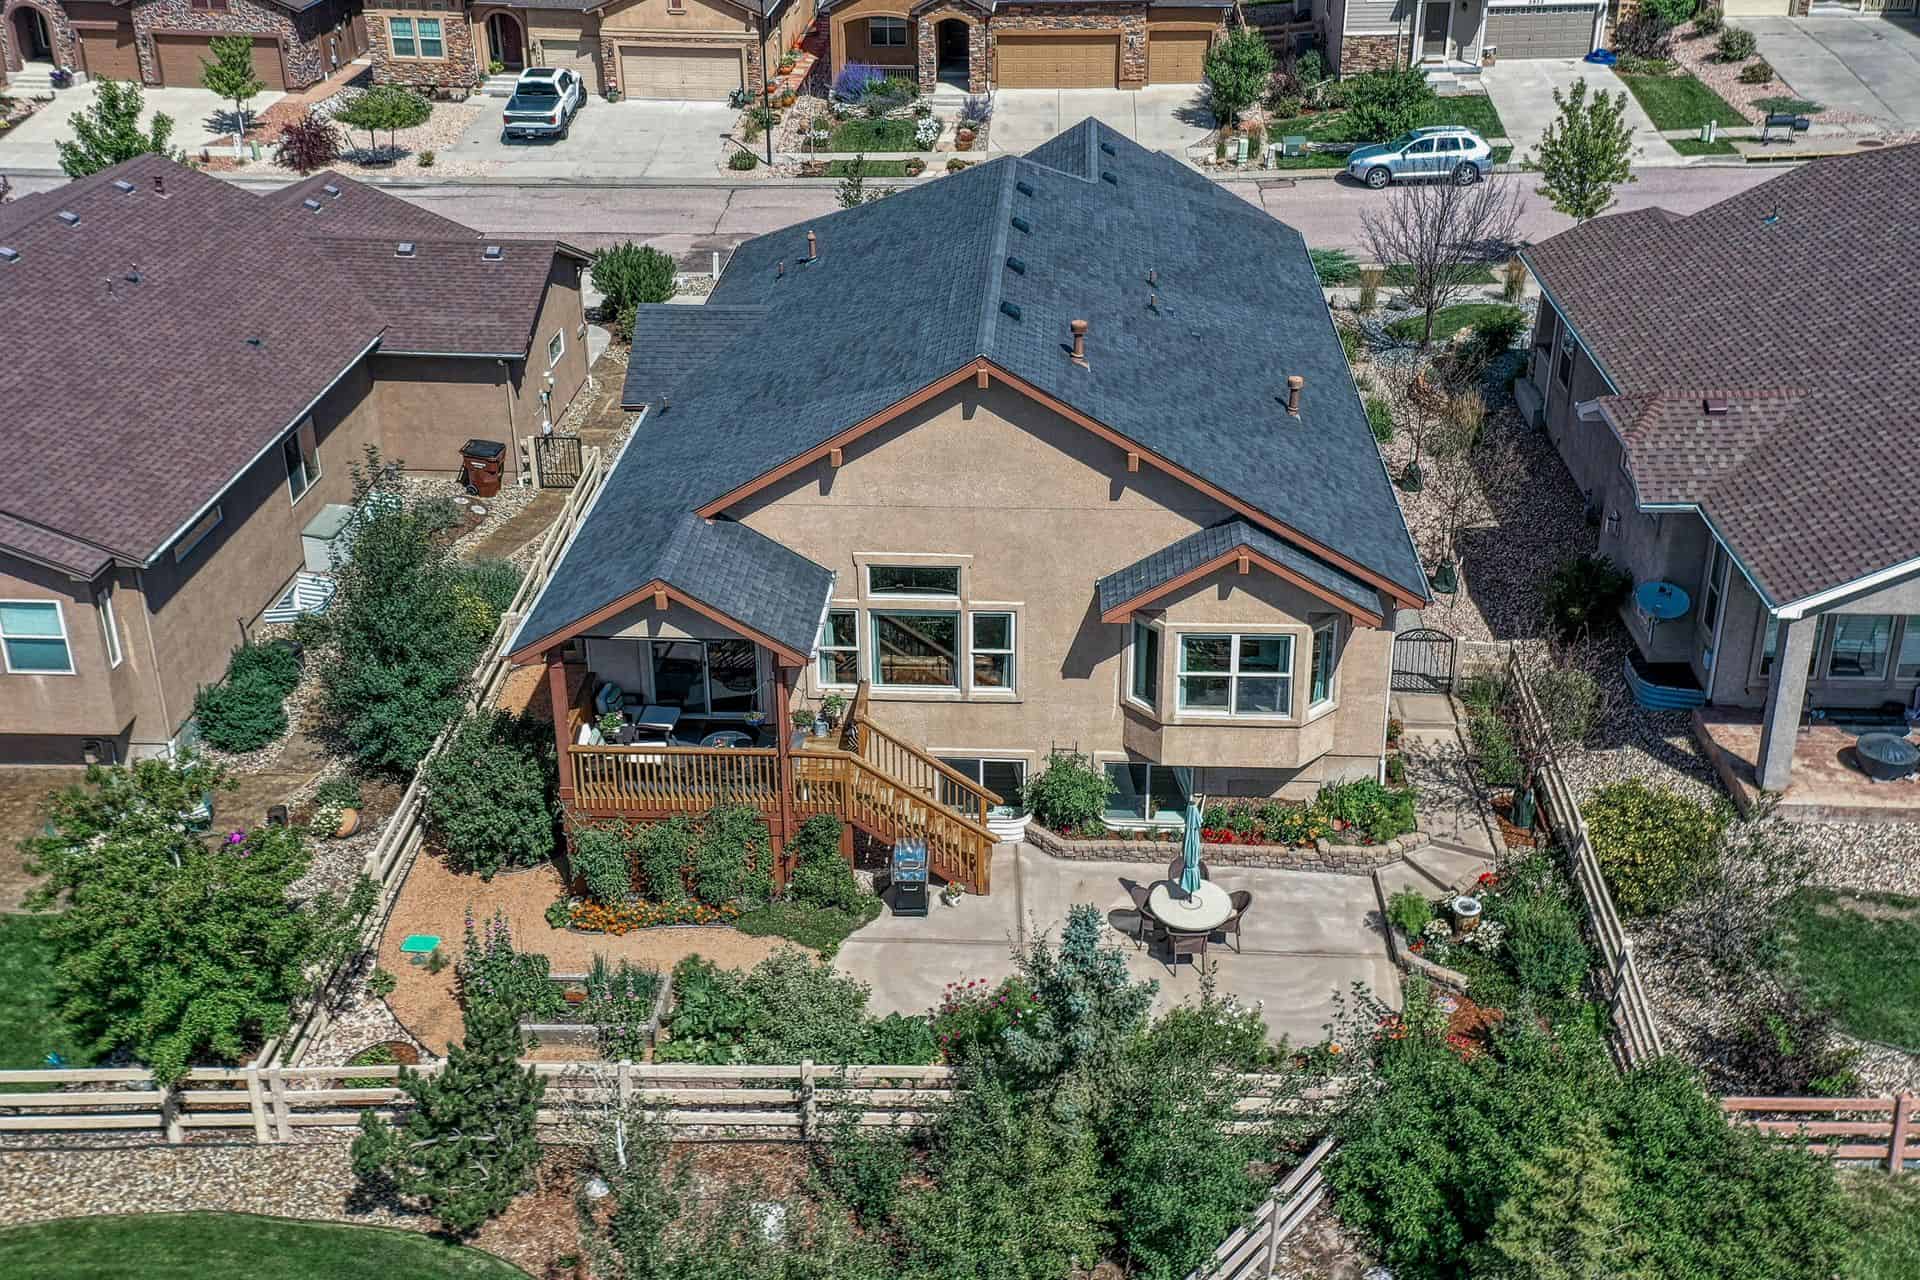 Aerial View of Backyard and Rear of Home